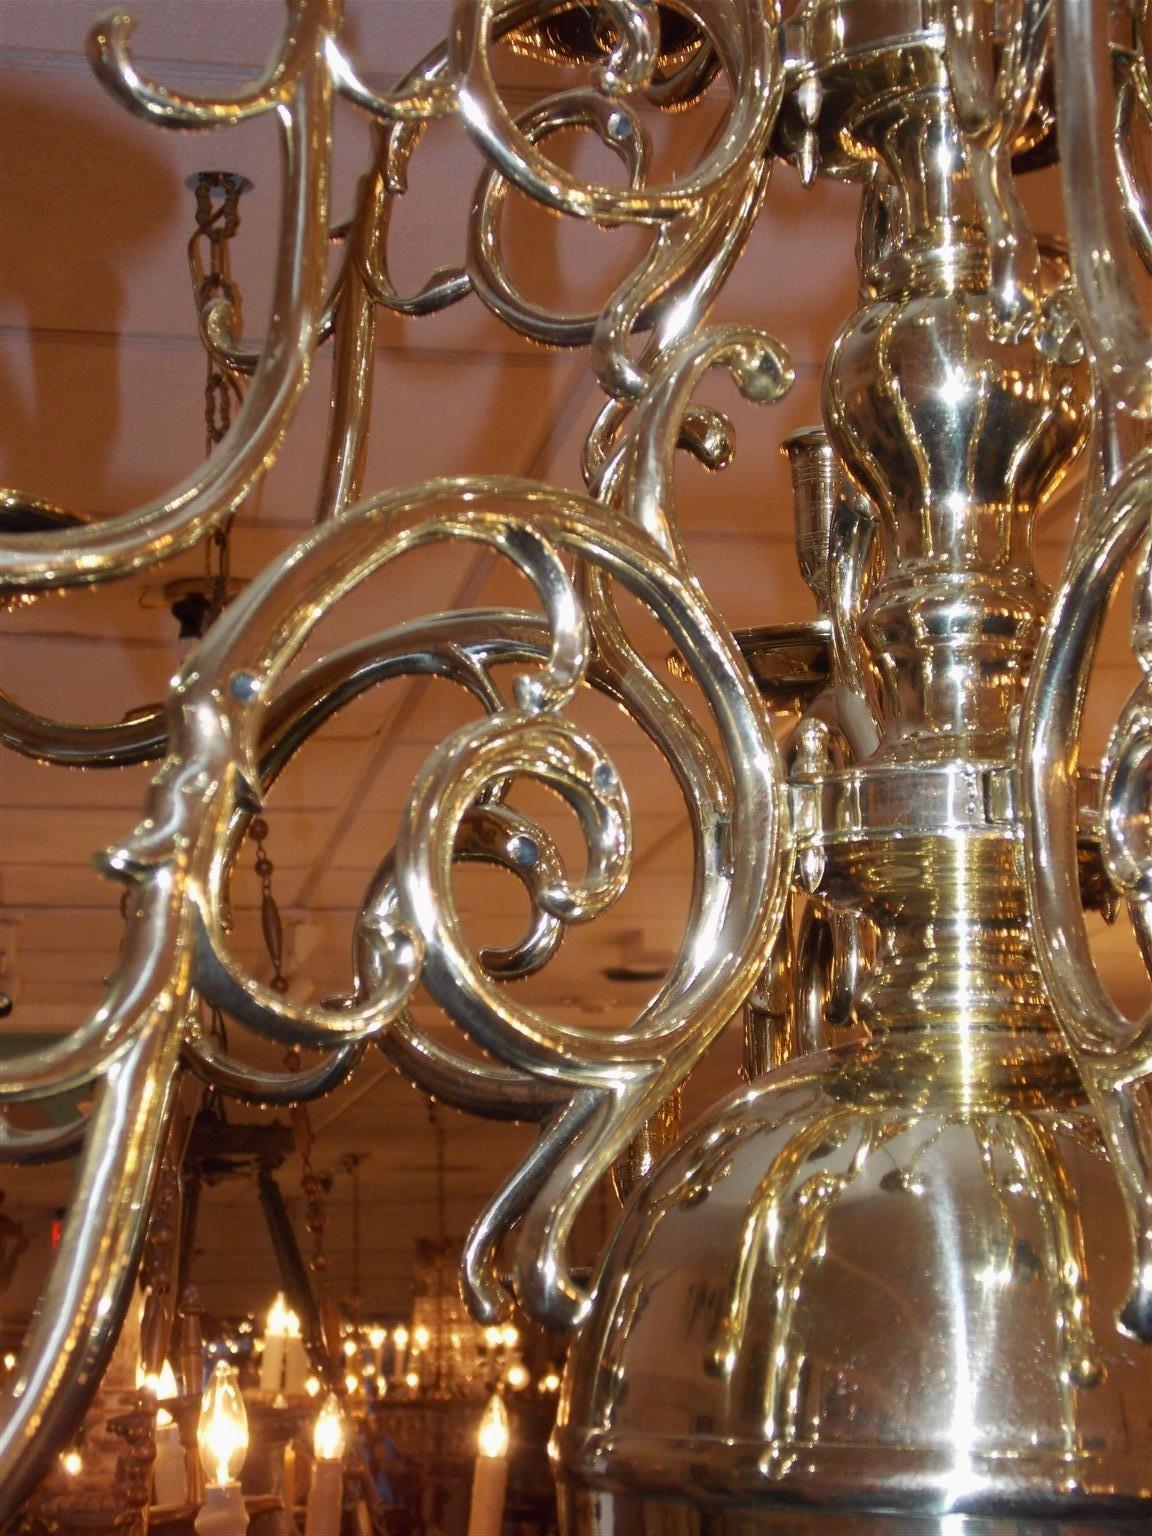 Dutch Colonial Brass Three-Tier Bulbous and Scrolled Chandelier, Circa 1760 (Mitte des 18. Jahrhunderts)